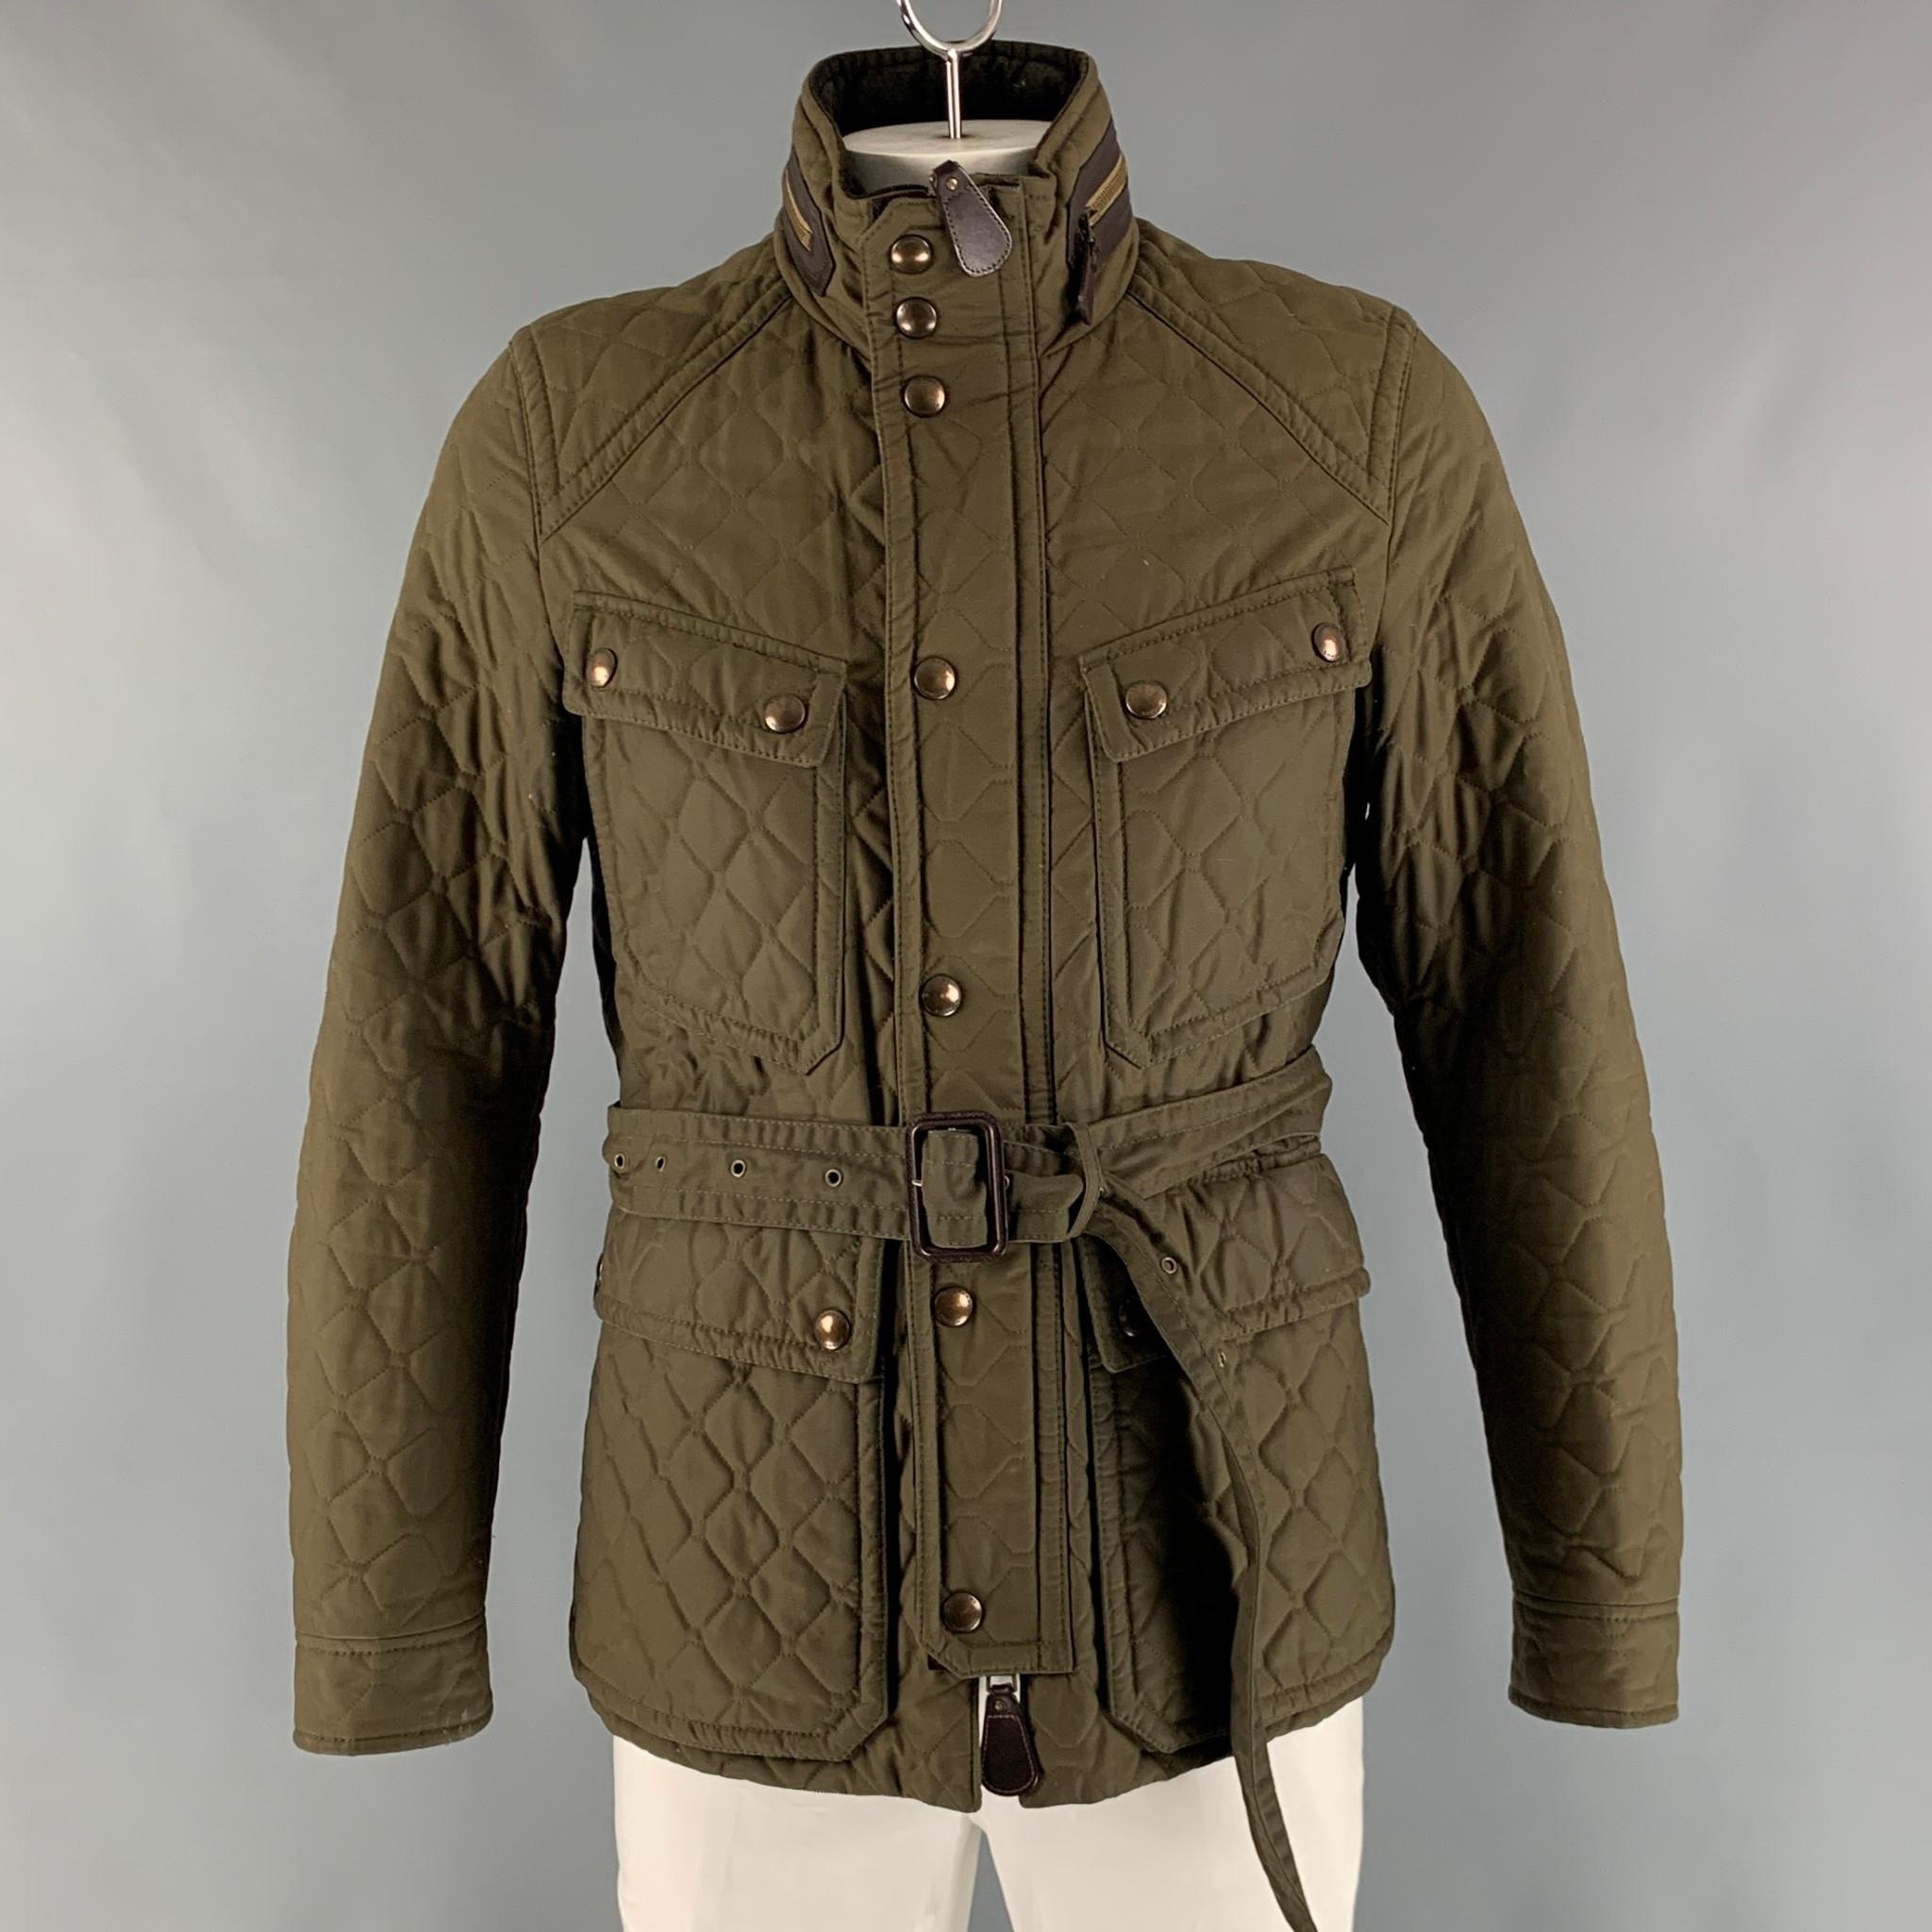 BURBERRY LONDON coat comes in an olive nylon blend woven material featuring a quilted design, high collar, belted, built-in hood, patch pockets, and a zip & snap button closure.

Excellent Pre-Owned Condition.
Marked: 54

Measurements:

Shoulder: 18